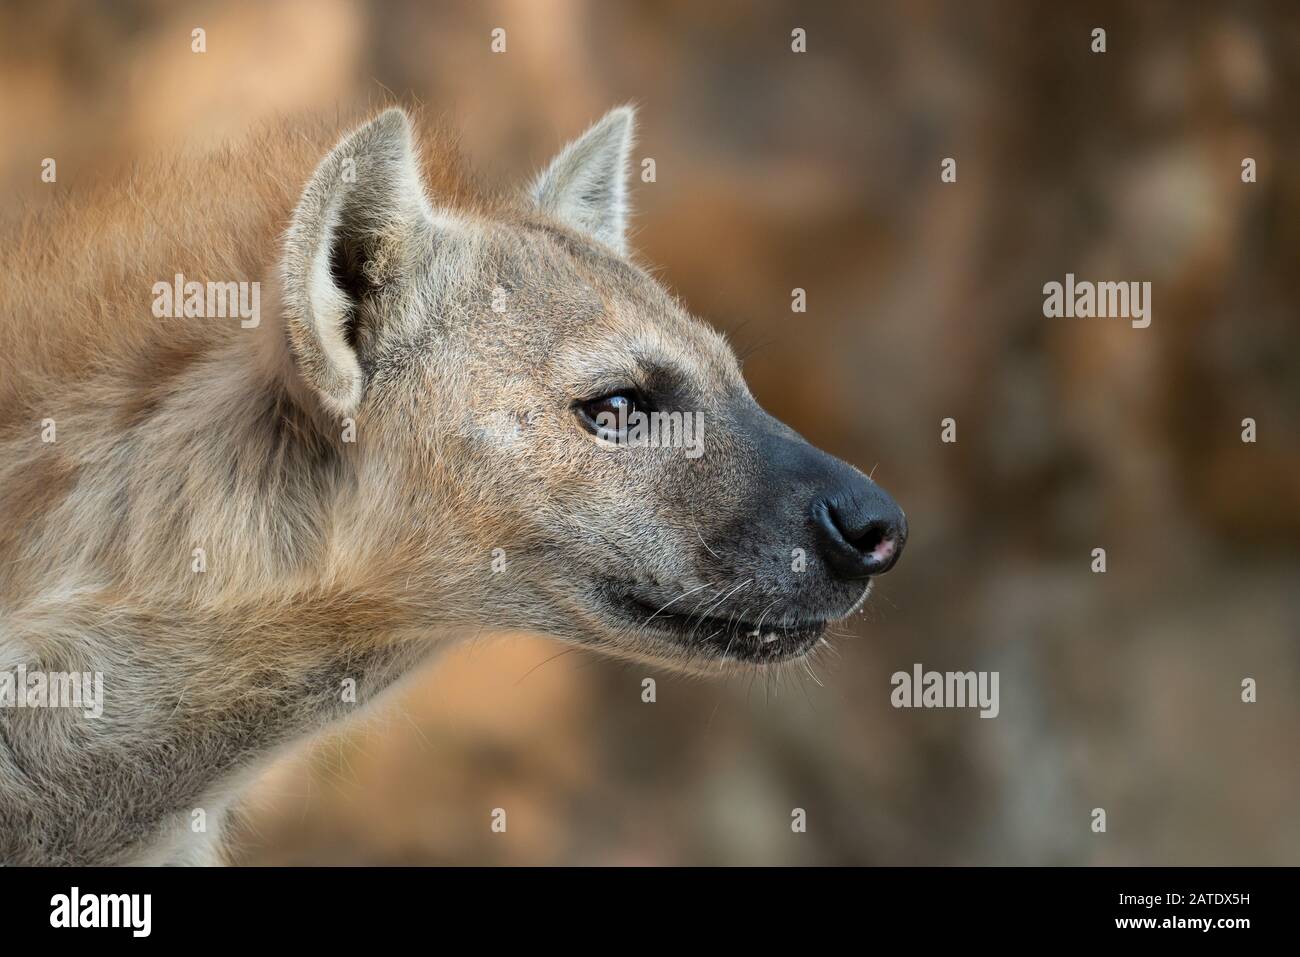 spotted hyena or laughing hyena head close up Stock Photo